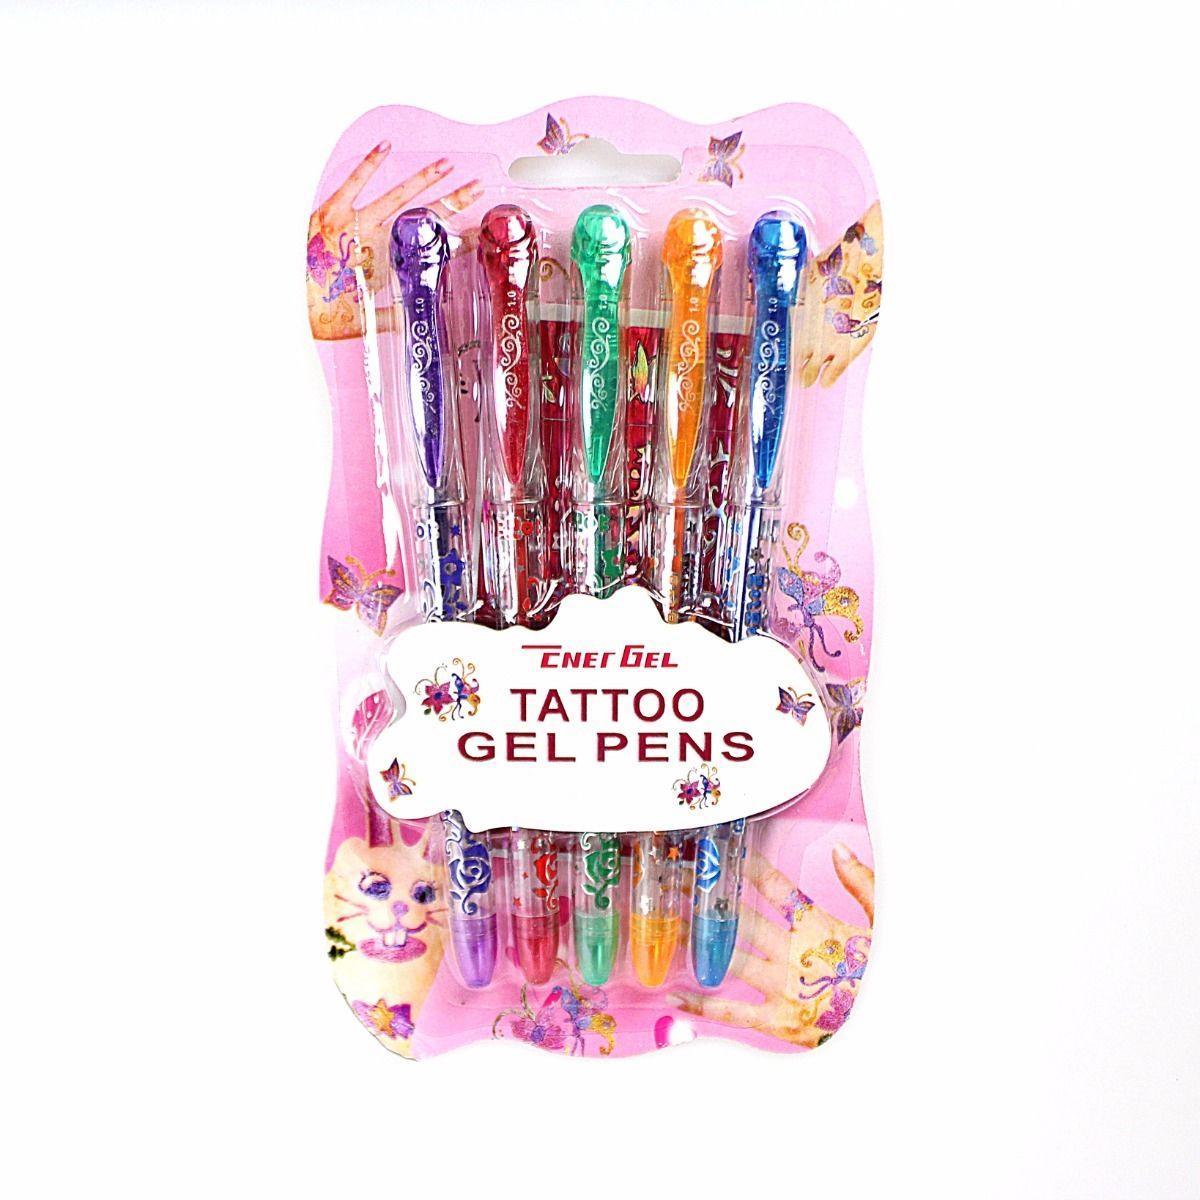 Tattoo Gel Pens Childrens Fun Art and Crafts Pens 2 Stencil Tattoo and 5 Gel Pens 3598 (Large Letter Rate)